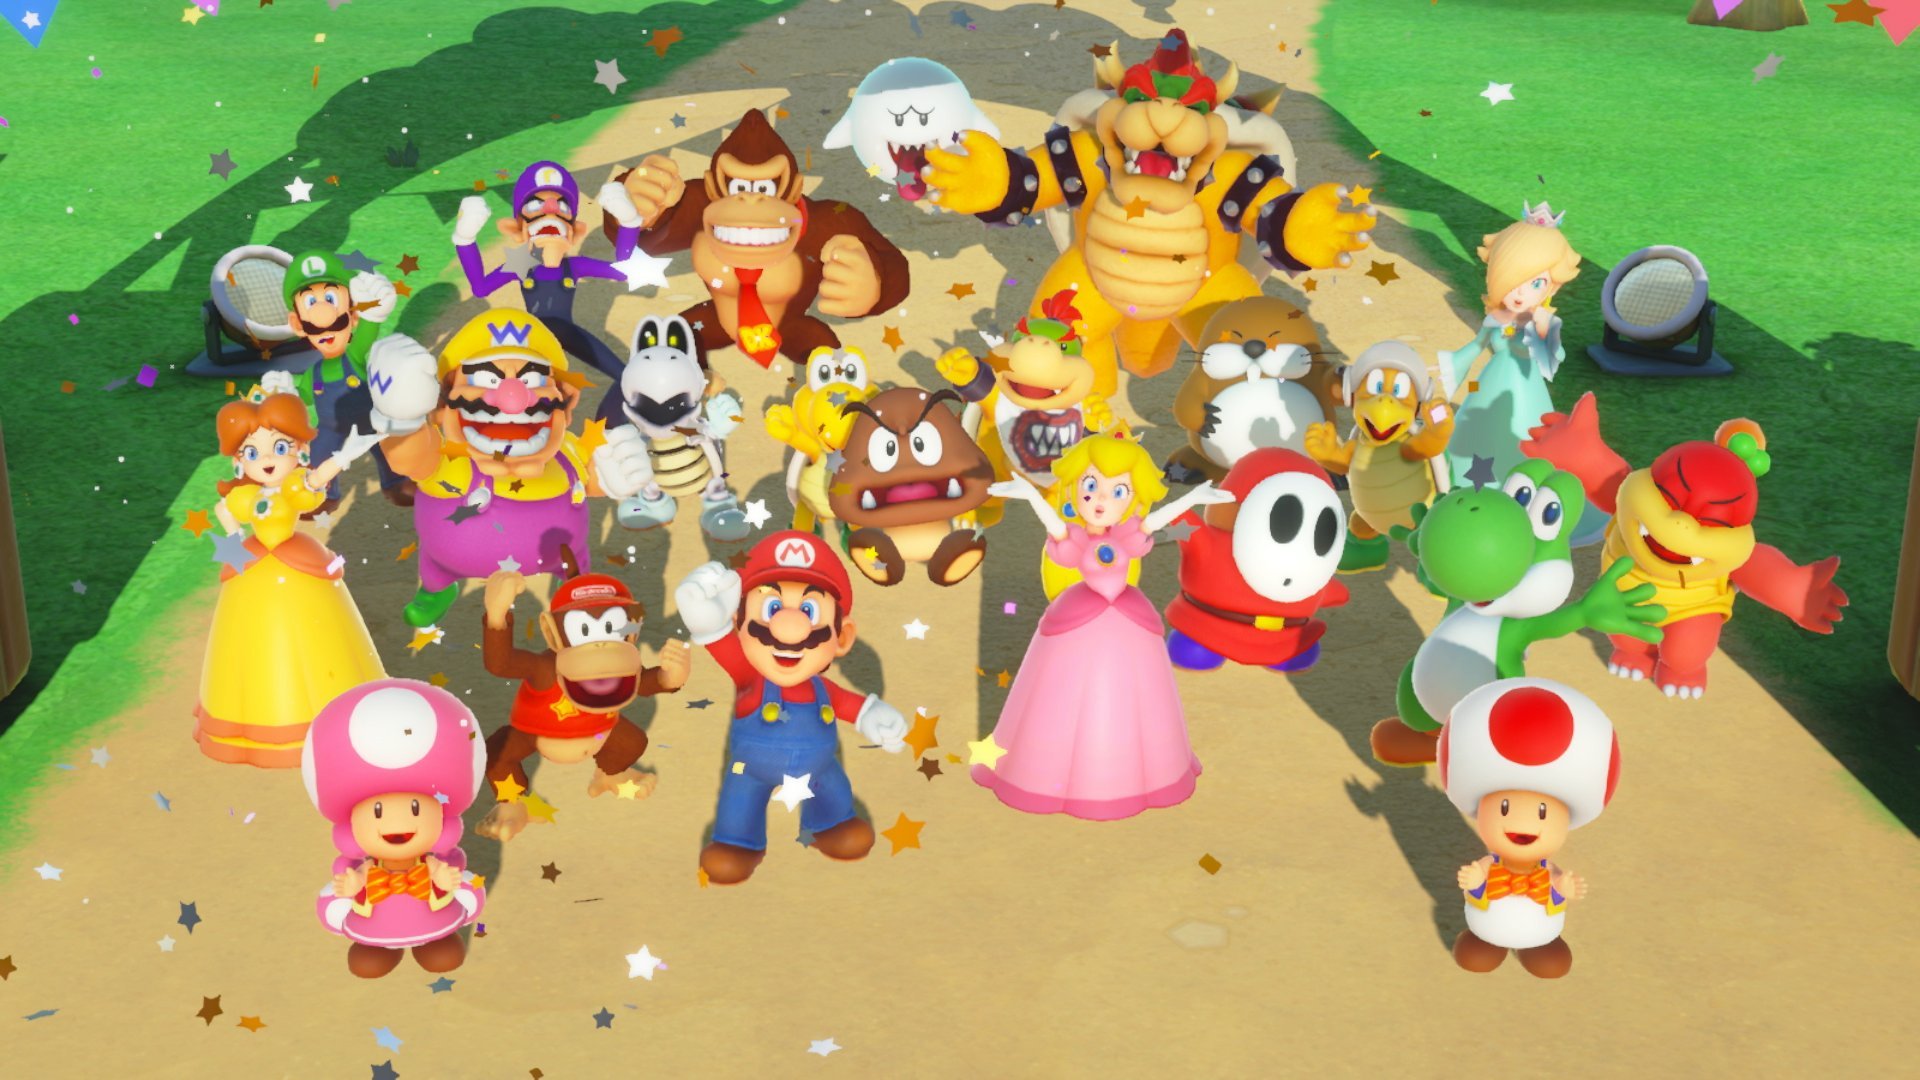 Super Mario Party Update Adds Online Play for 70 Mini-games, Partner Party  and More